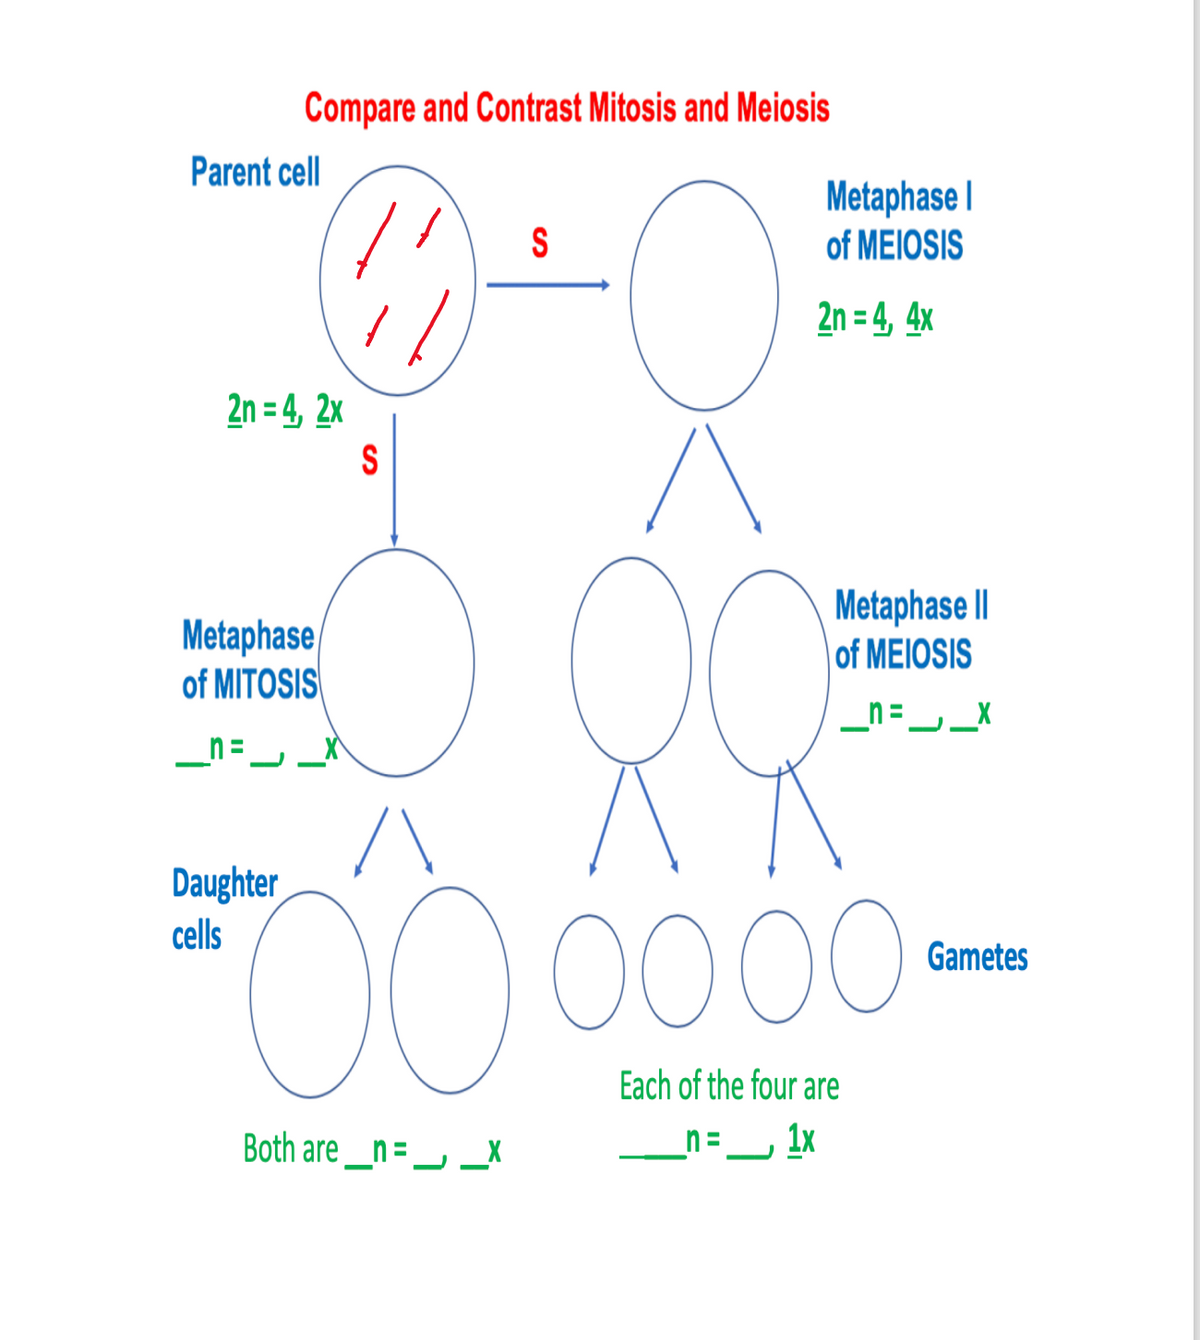 Compare and Contrast Mitosis and Meiosis
Parent cell
2n=4, 2x
Metaphase
of MITOSIS
_n=
Daughter
cells
S
Both are_n=___X
S
Metaphase I
of MEIOSIS
2n=4, 4x
Metaphase II
of MEIOSIS
_n=___x
0000
Each of the four are
_n = 1x
Gametes